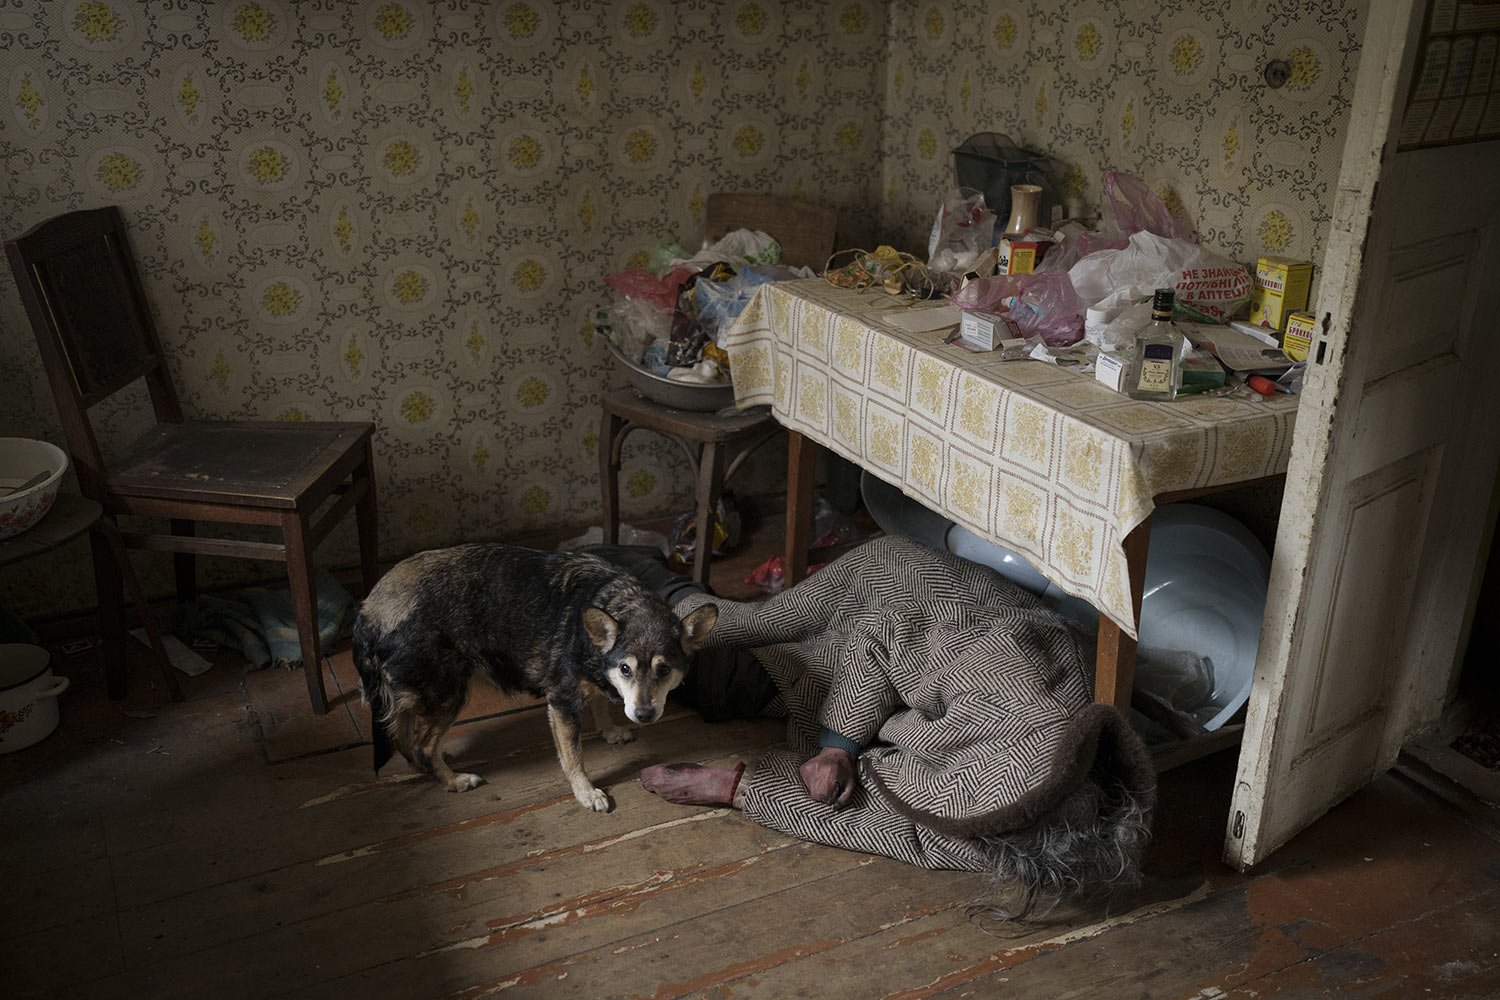  A dog stands next to the body of an elderly woman killed inside a home in Bucha on the outskirts of Kyiv, Ukraine, Tuesday, April 5, 2022. (AP Photo/Felipe Dana) 